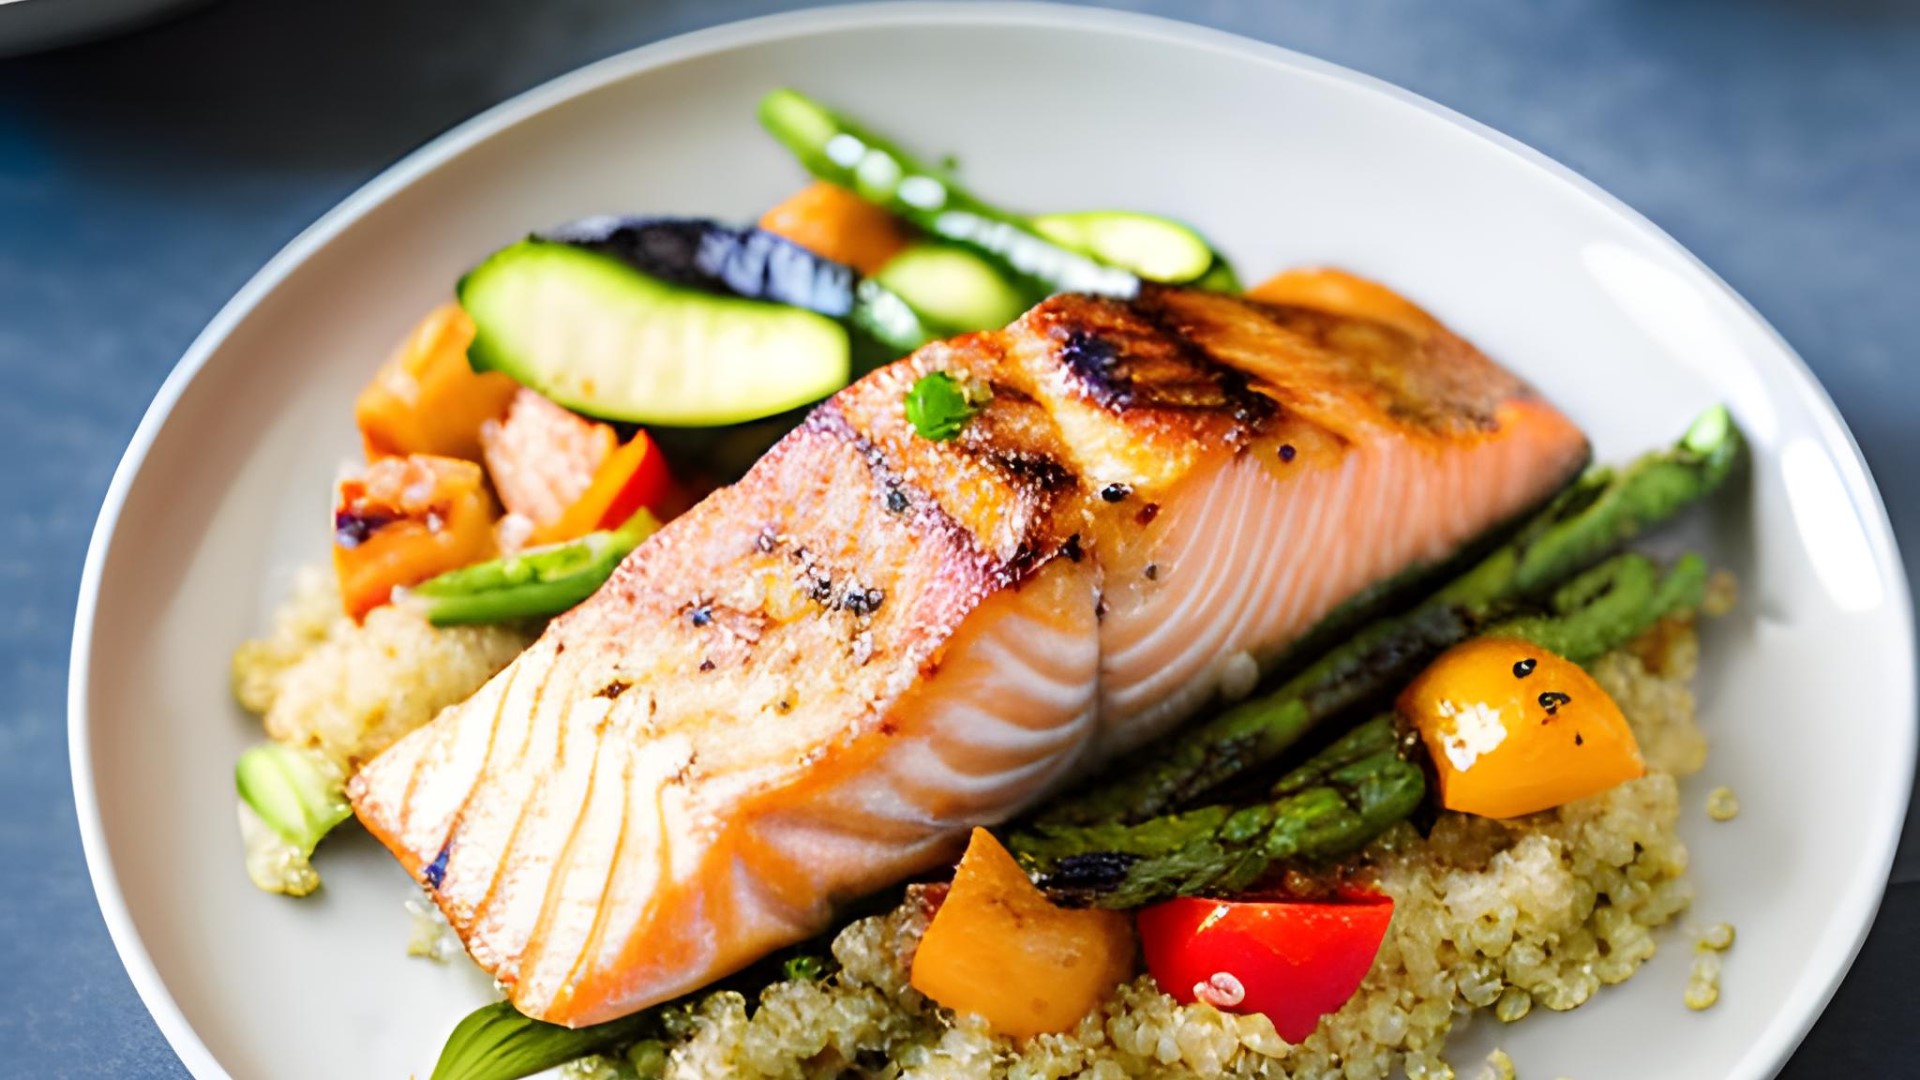 Grilled_Salmon_with_Quinoa_and_Veggies.jpg